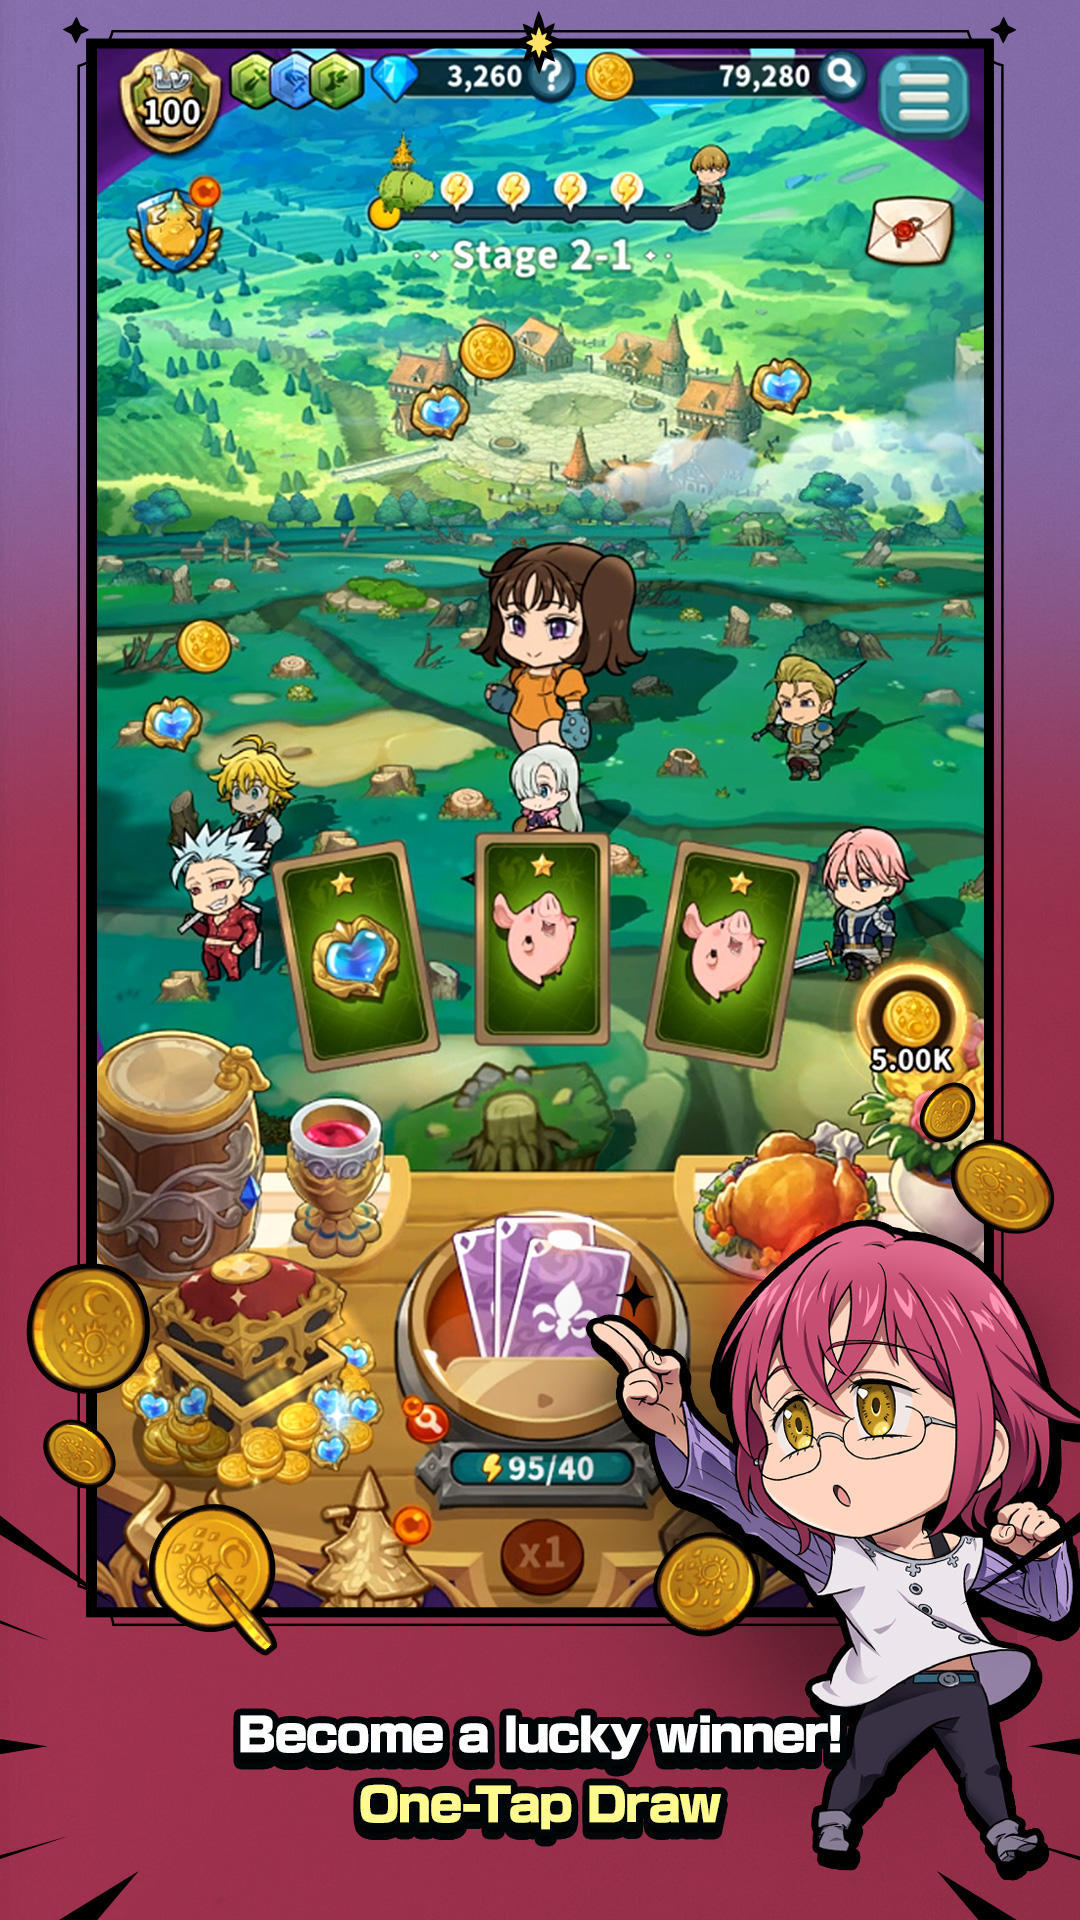 Screenshot of The Seven Deadly Sins: Idle